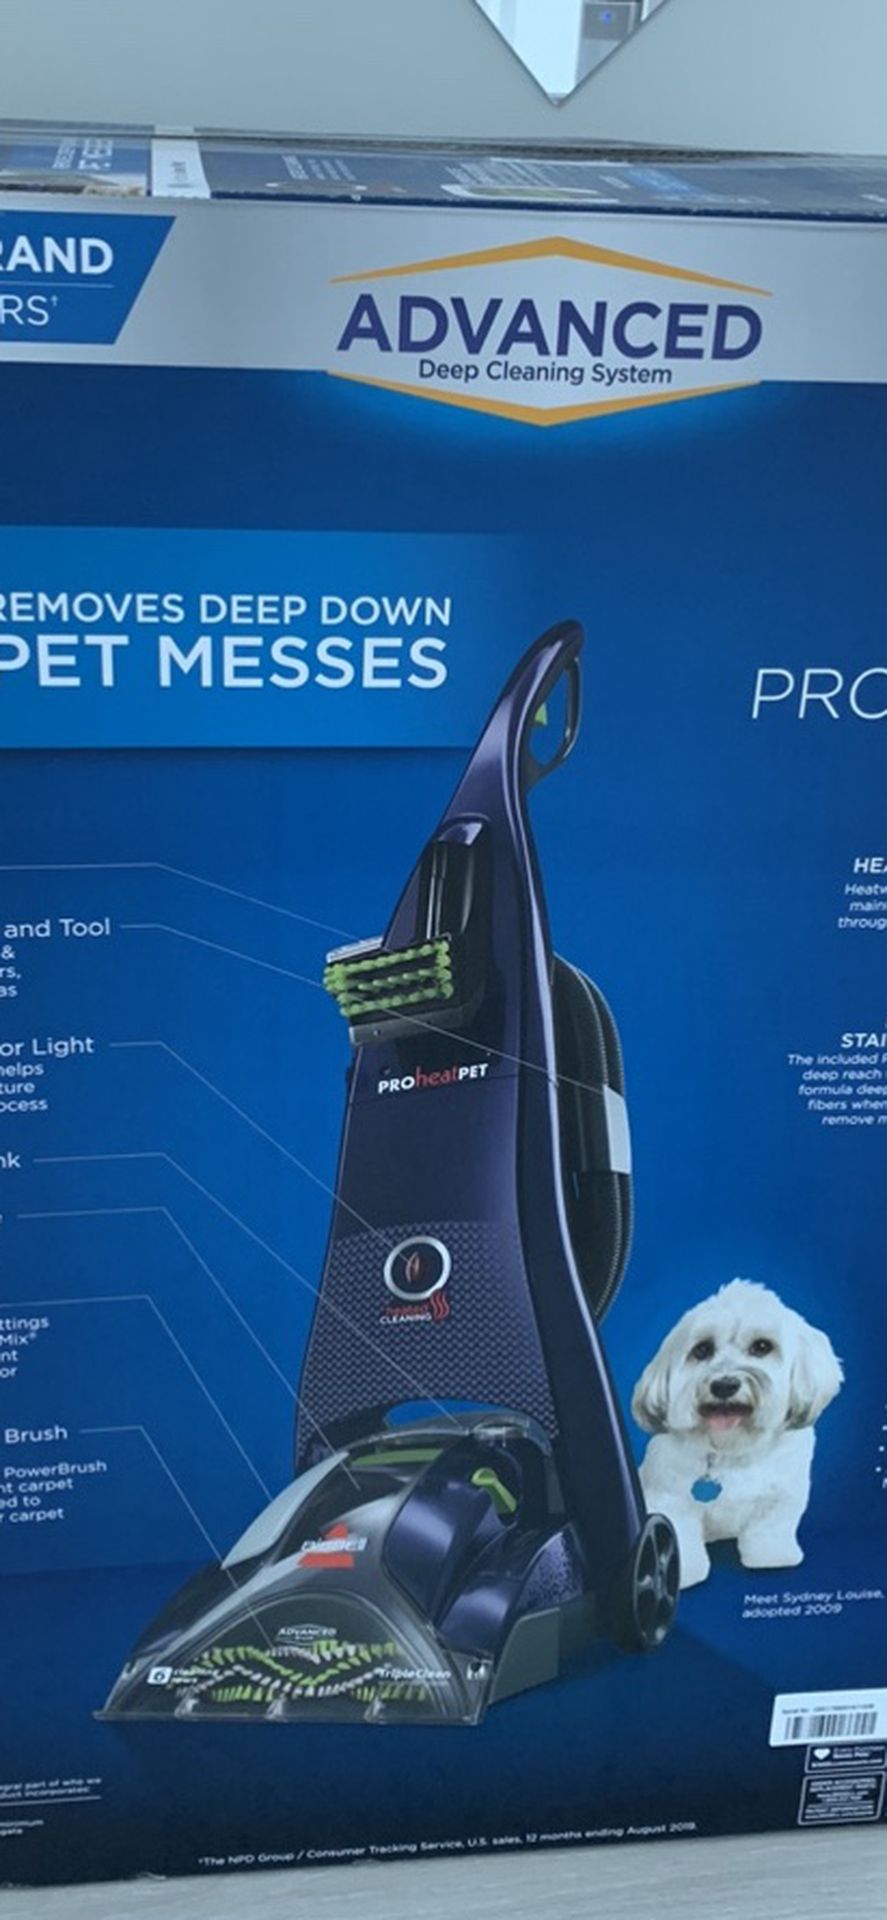 BISSELL ProHeat Pet Advanced Upright Carpet Cleaner - Model # 1799